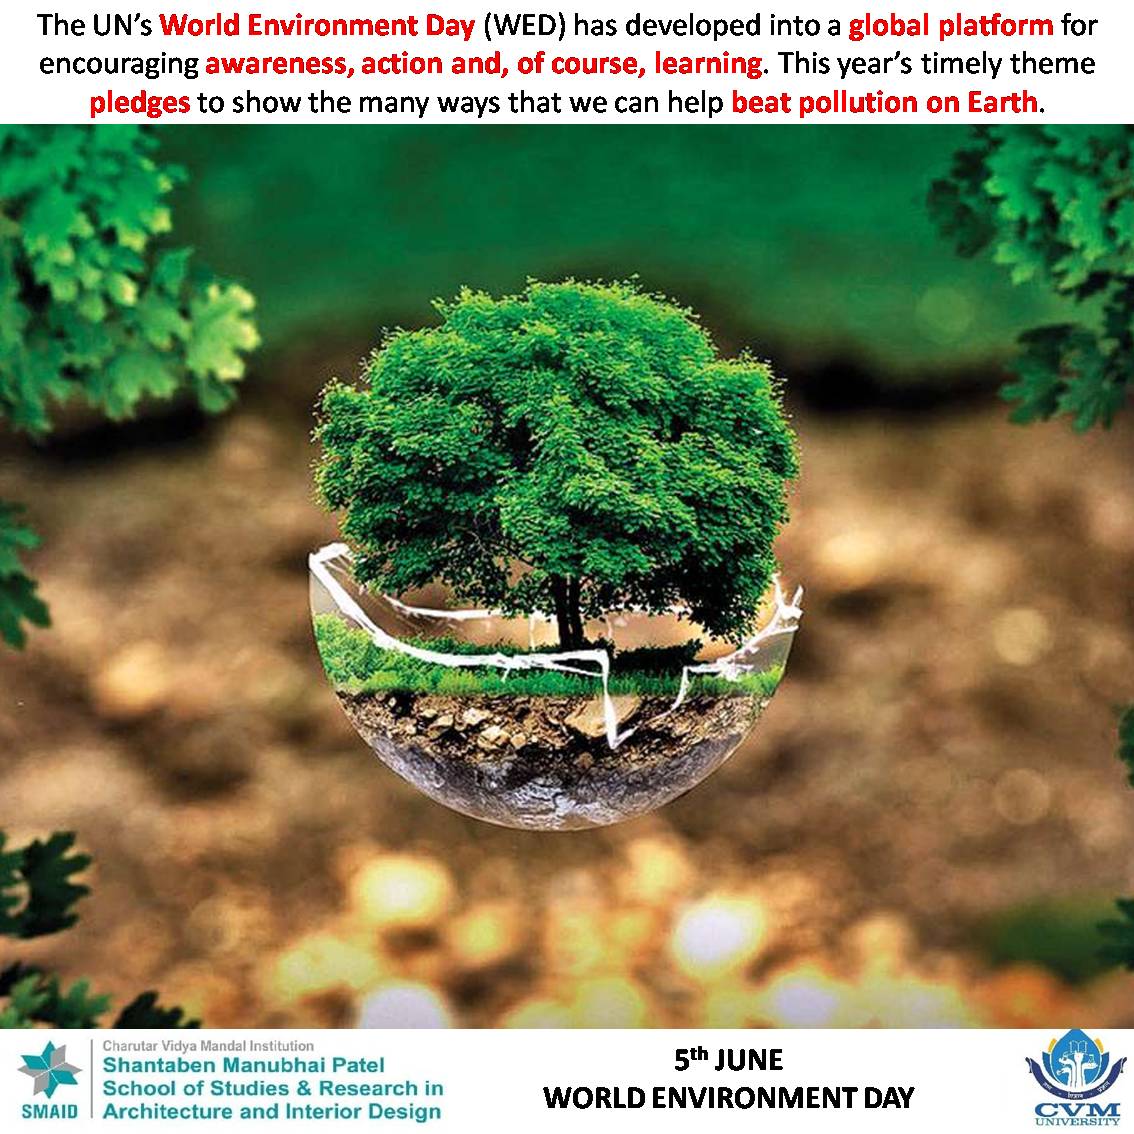 5th June World Environment Day